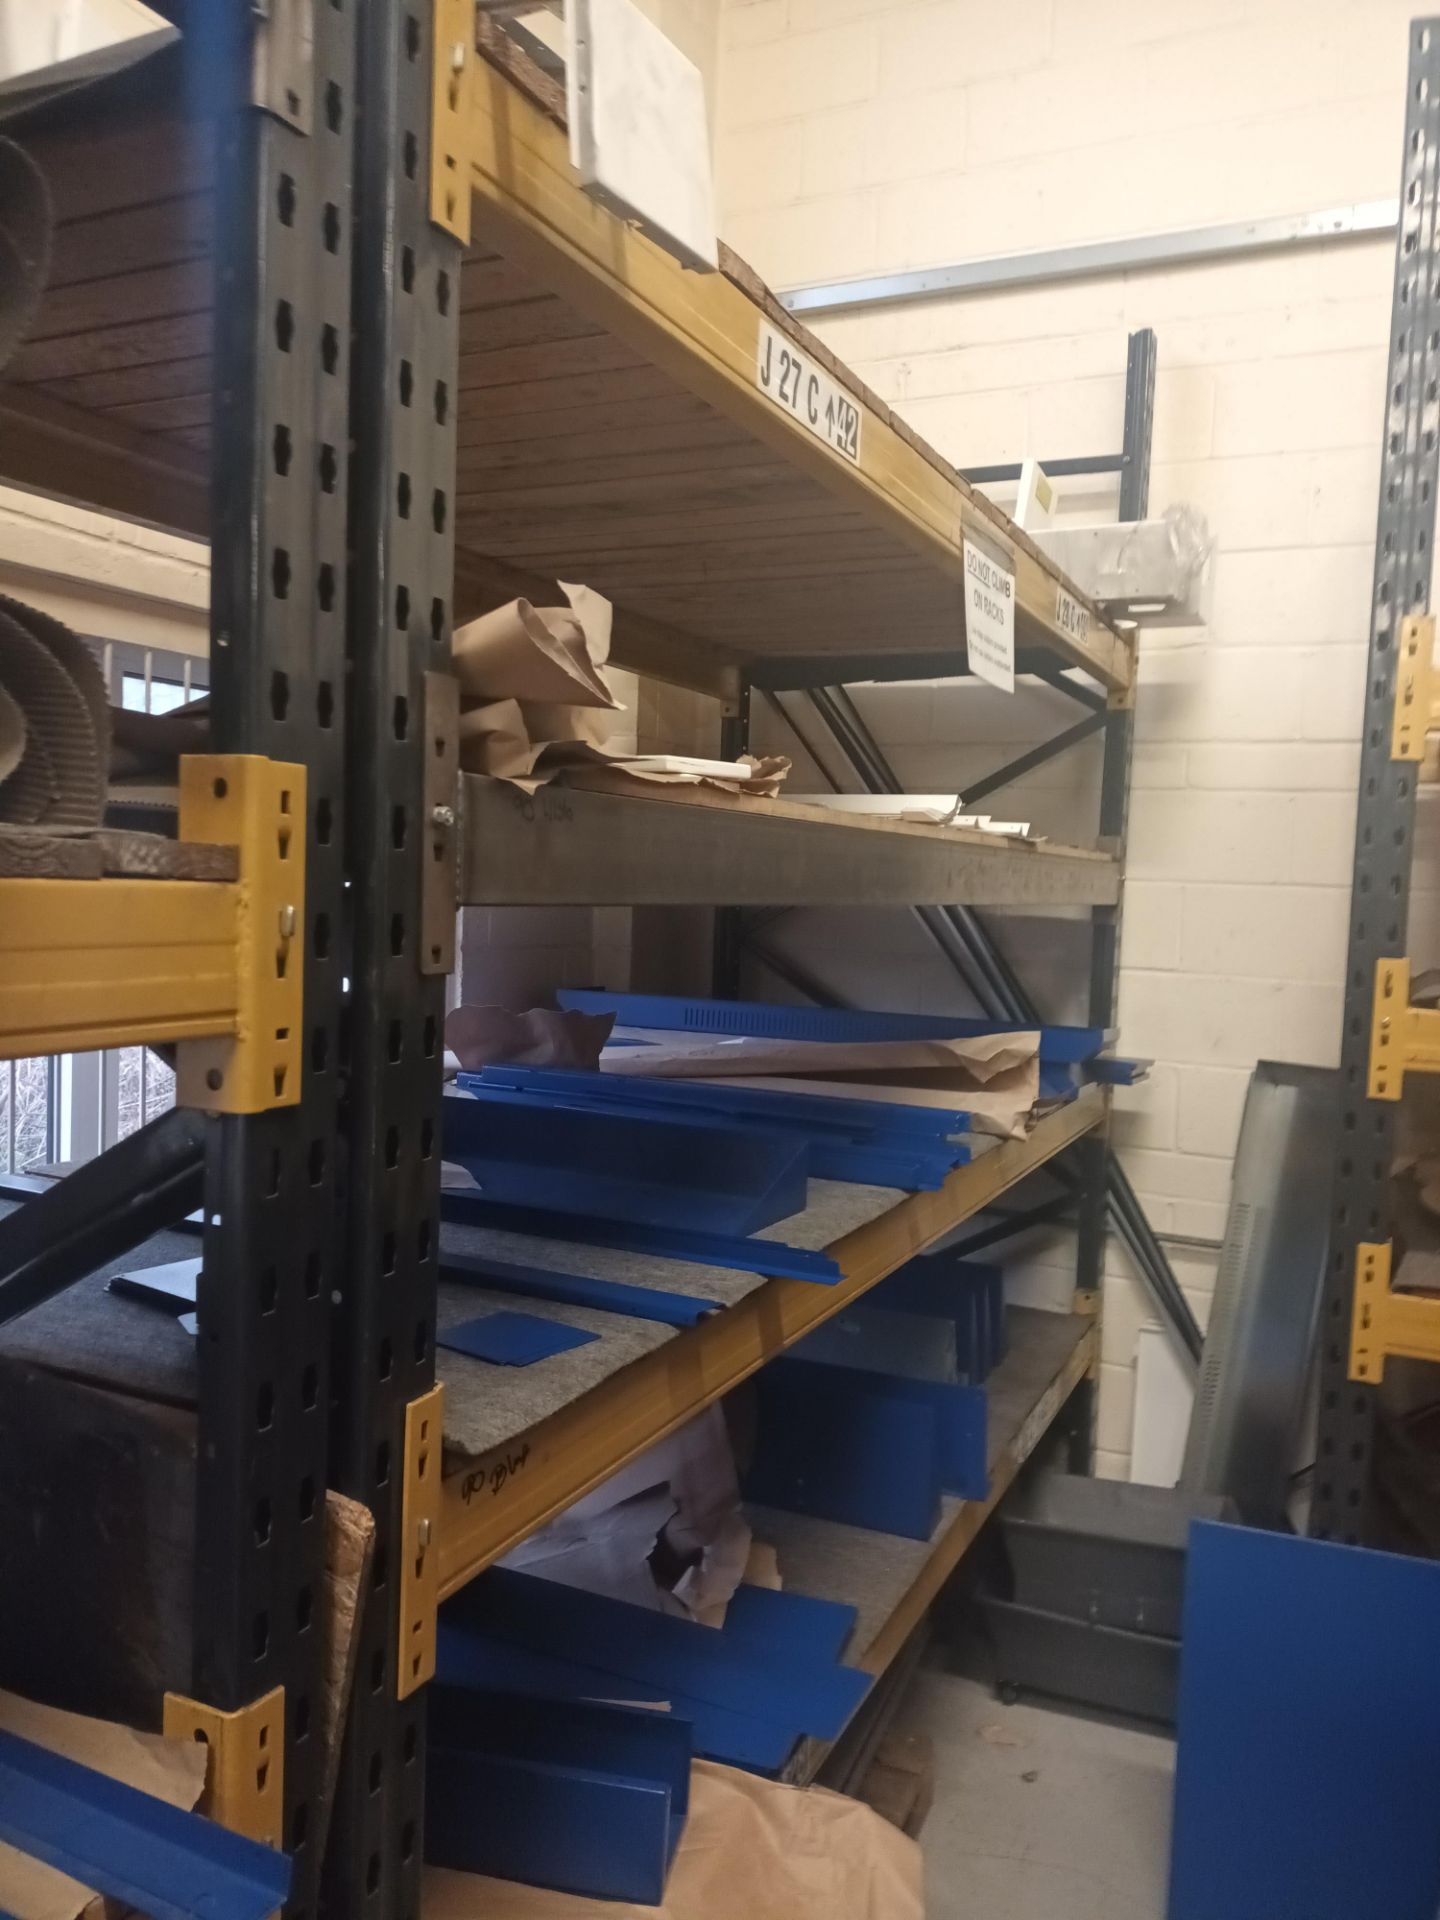 Five bays of heavy duty four tier racking units - Image 3 of 5